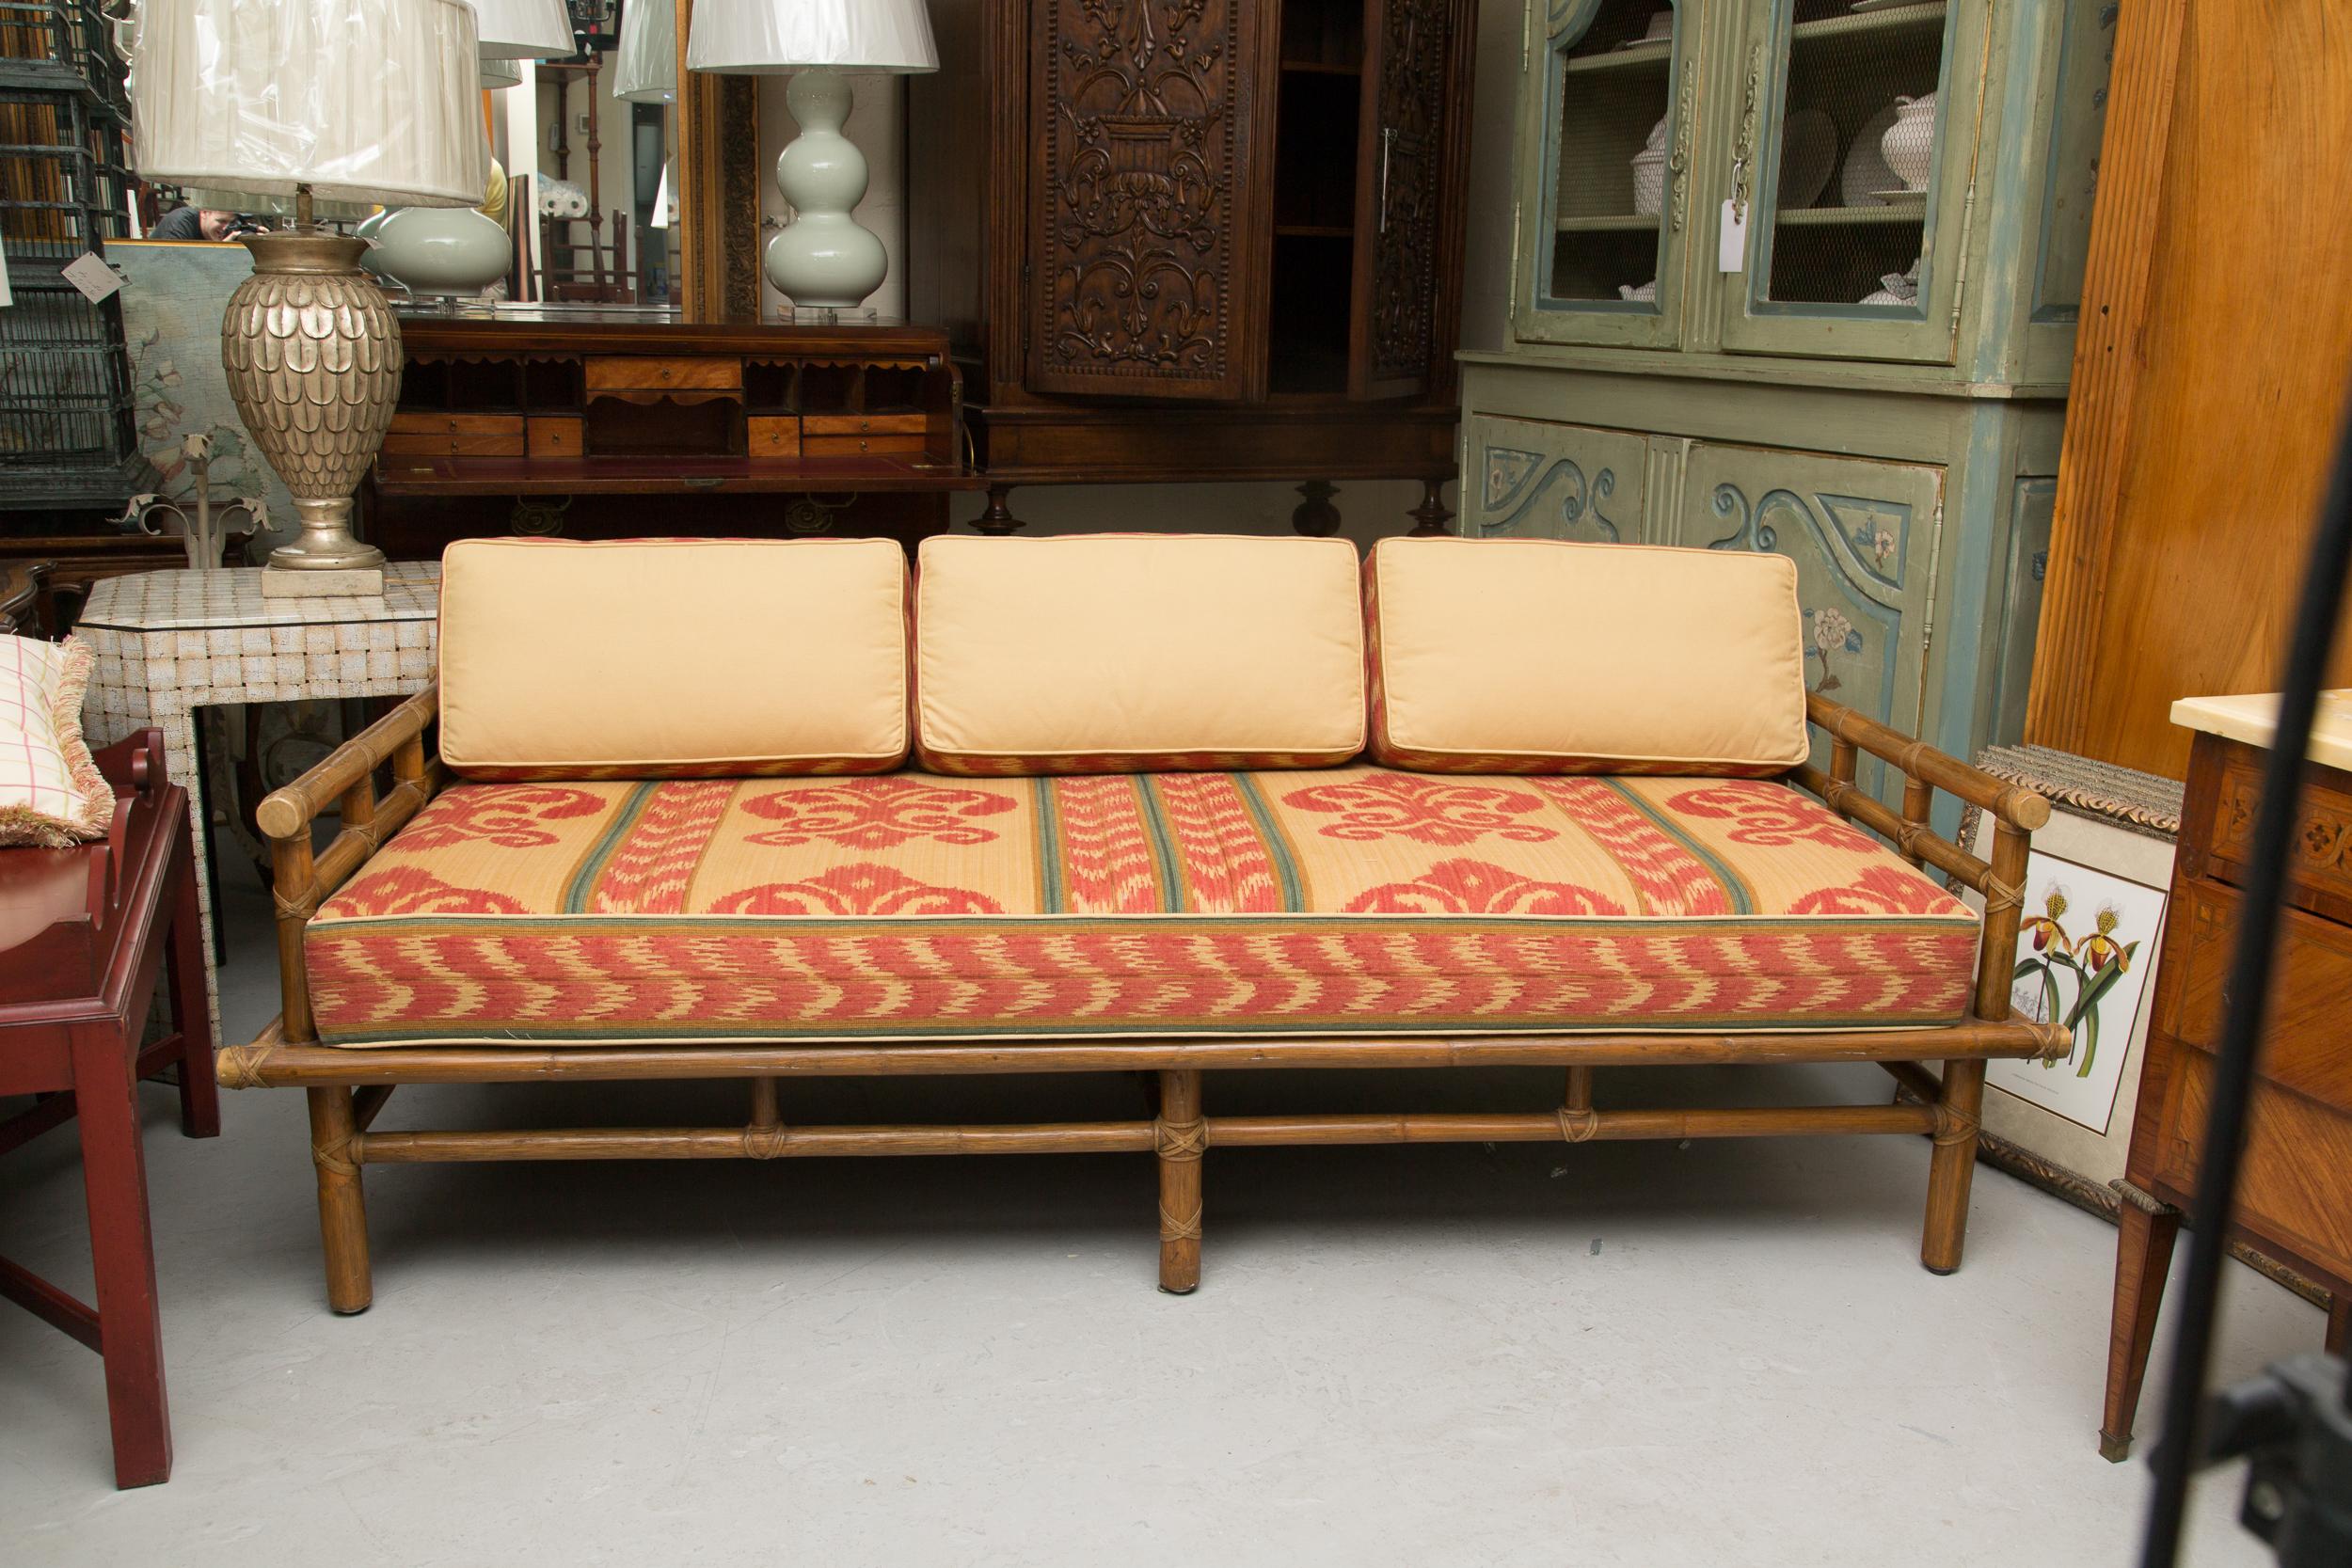 This vintage McGuire rattan daybed has been lovingly restored with new support webbing and upholstery, circa 1950.